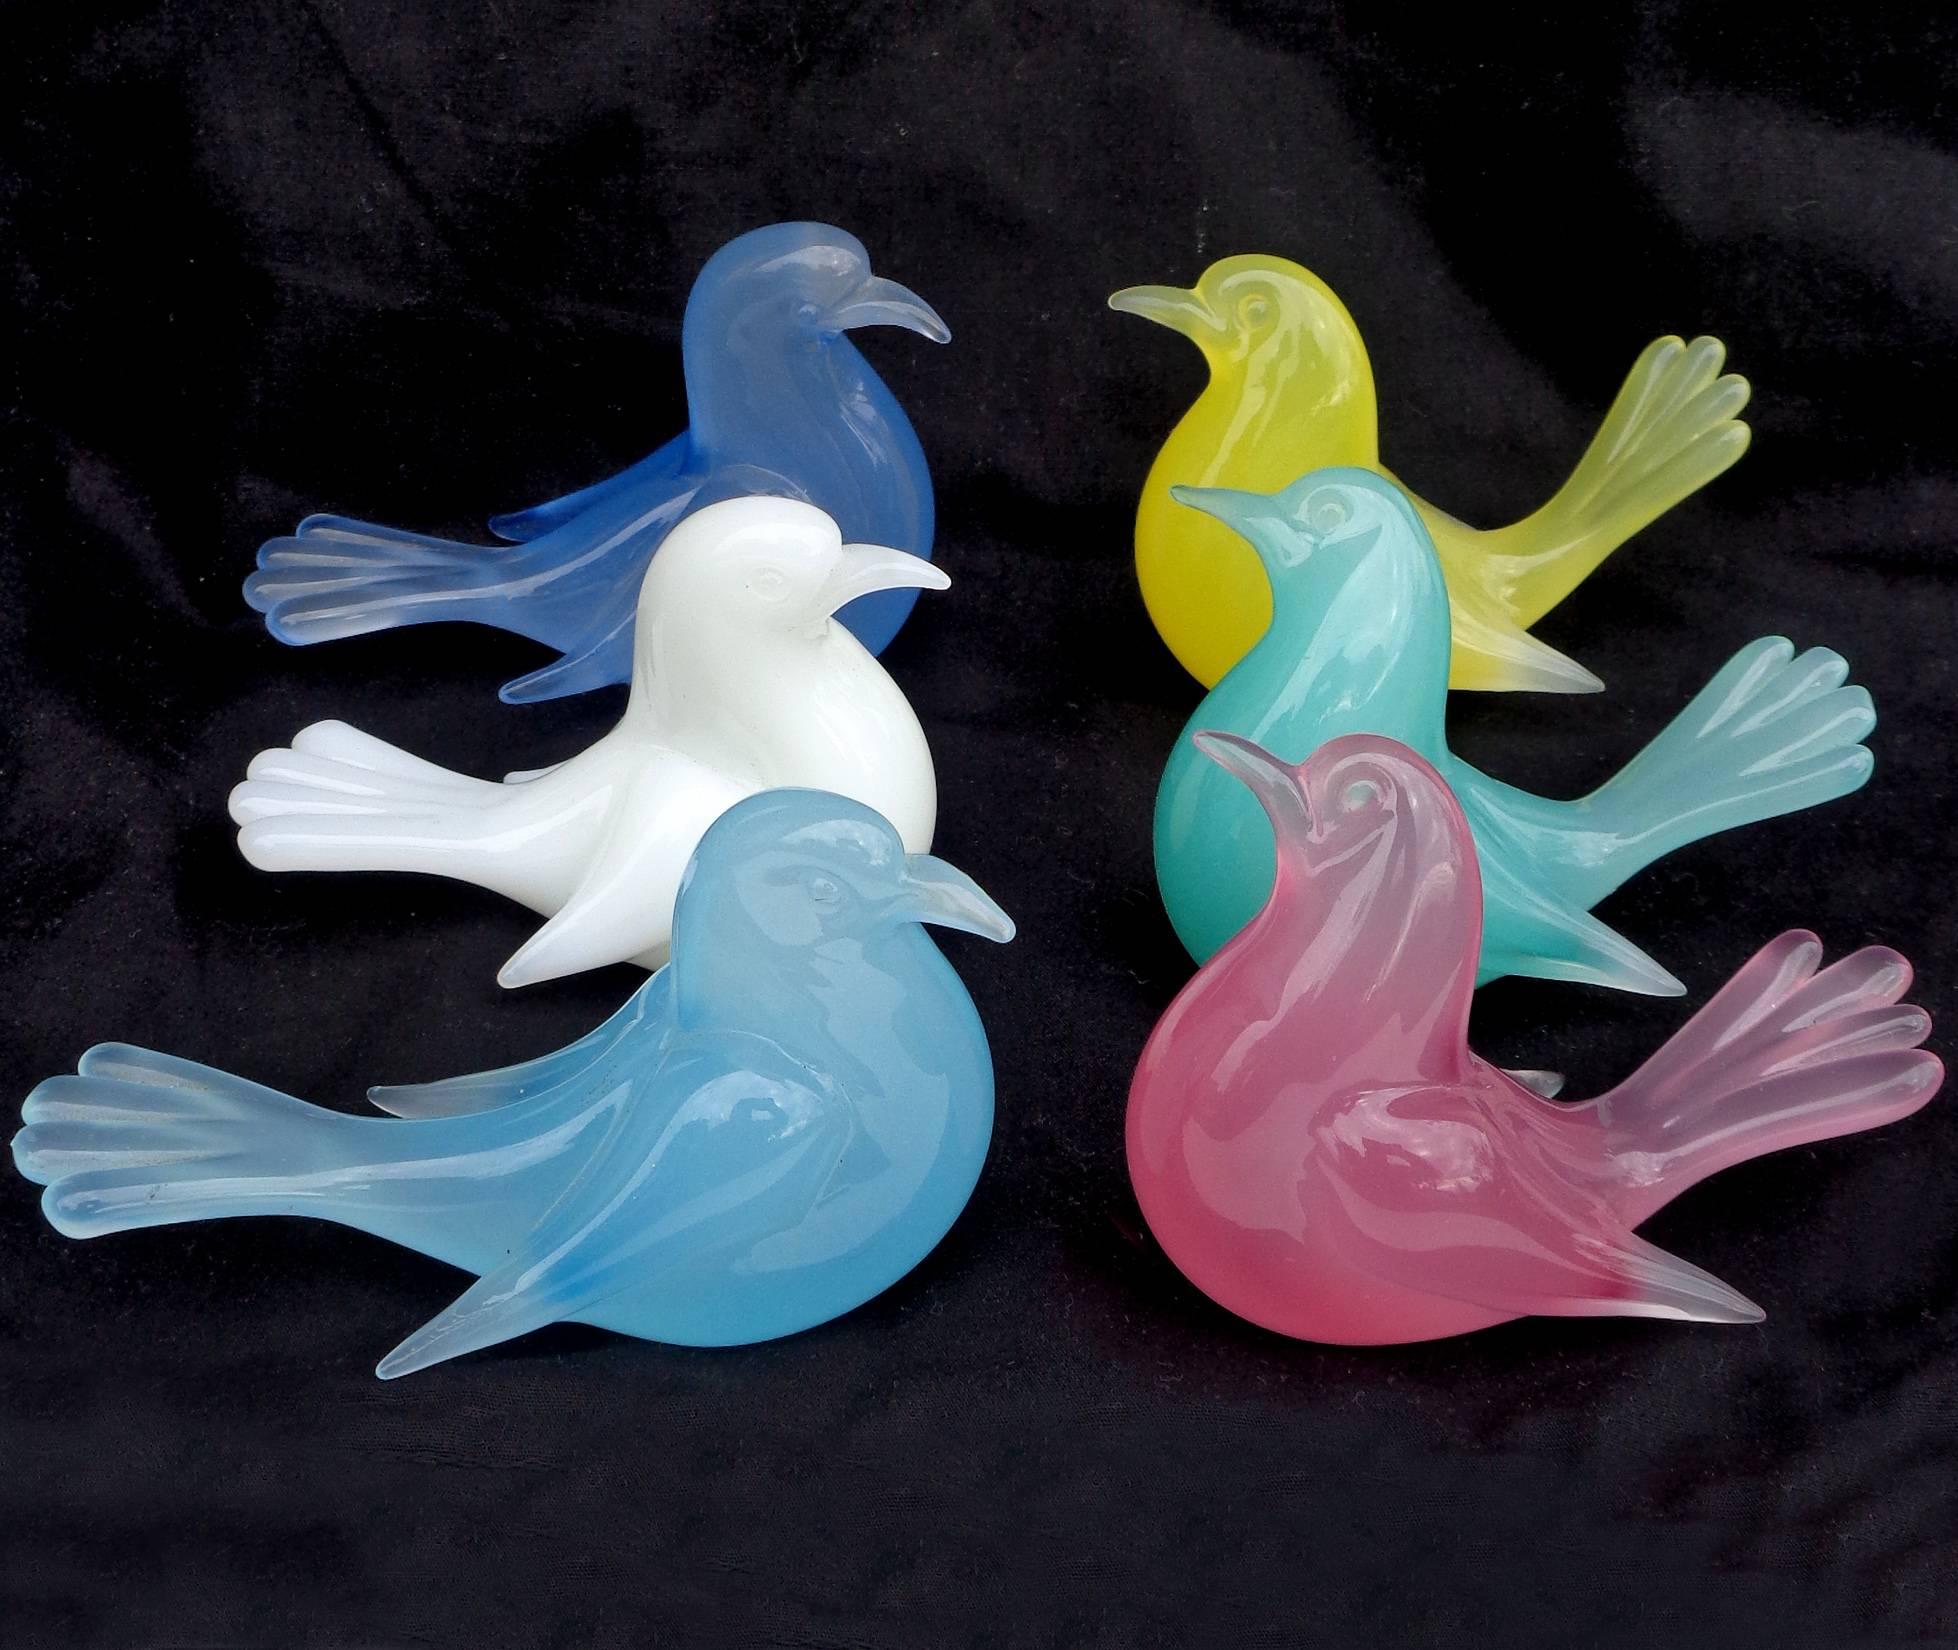 Free shipping worldwide! See details below description.

Amazing set of six Murano handblown opal white, powder blue, aqua blue, cobalt blue, yellow and pink art glass bird figurines. Documented to designer Archimede Seguso, some with labels still